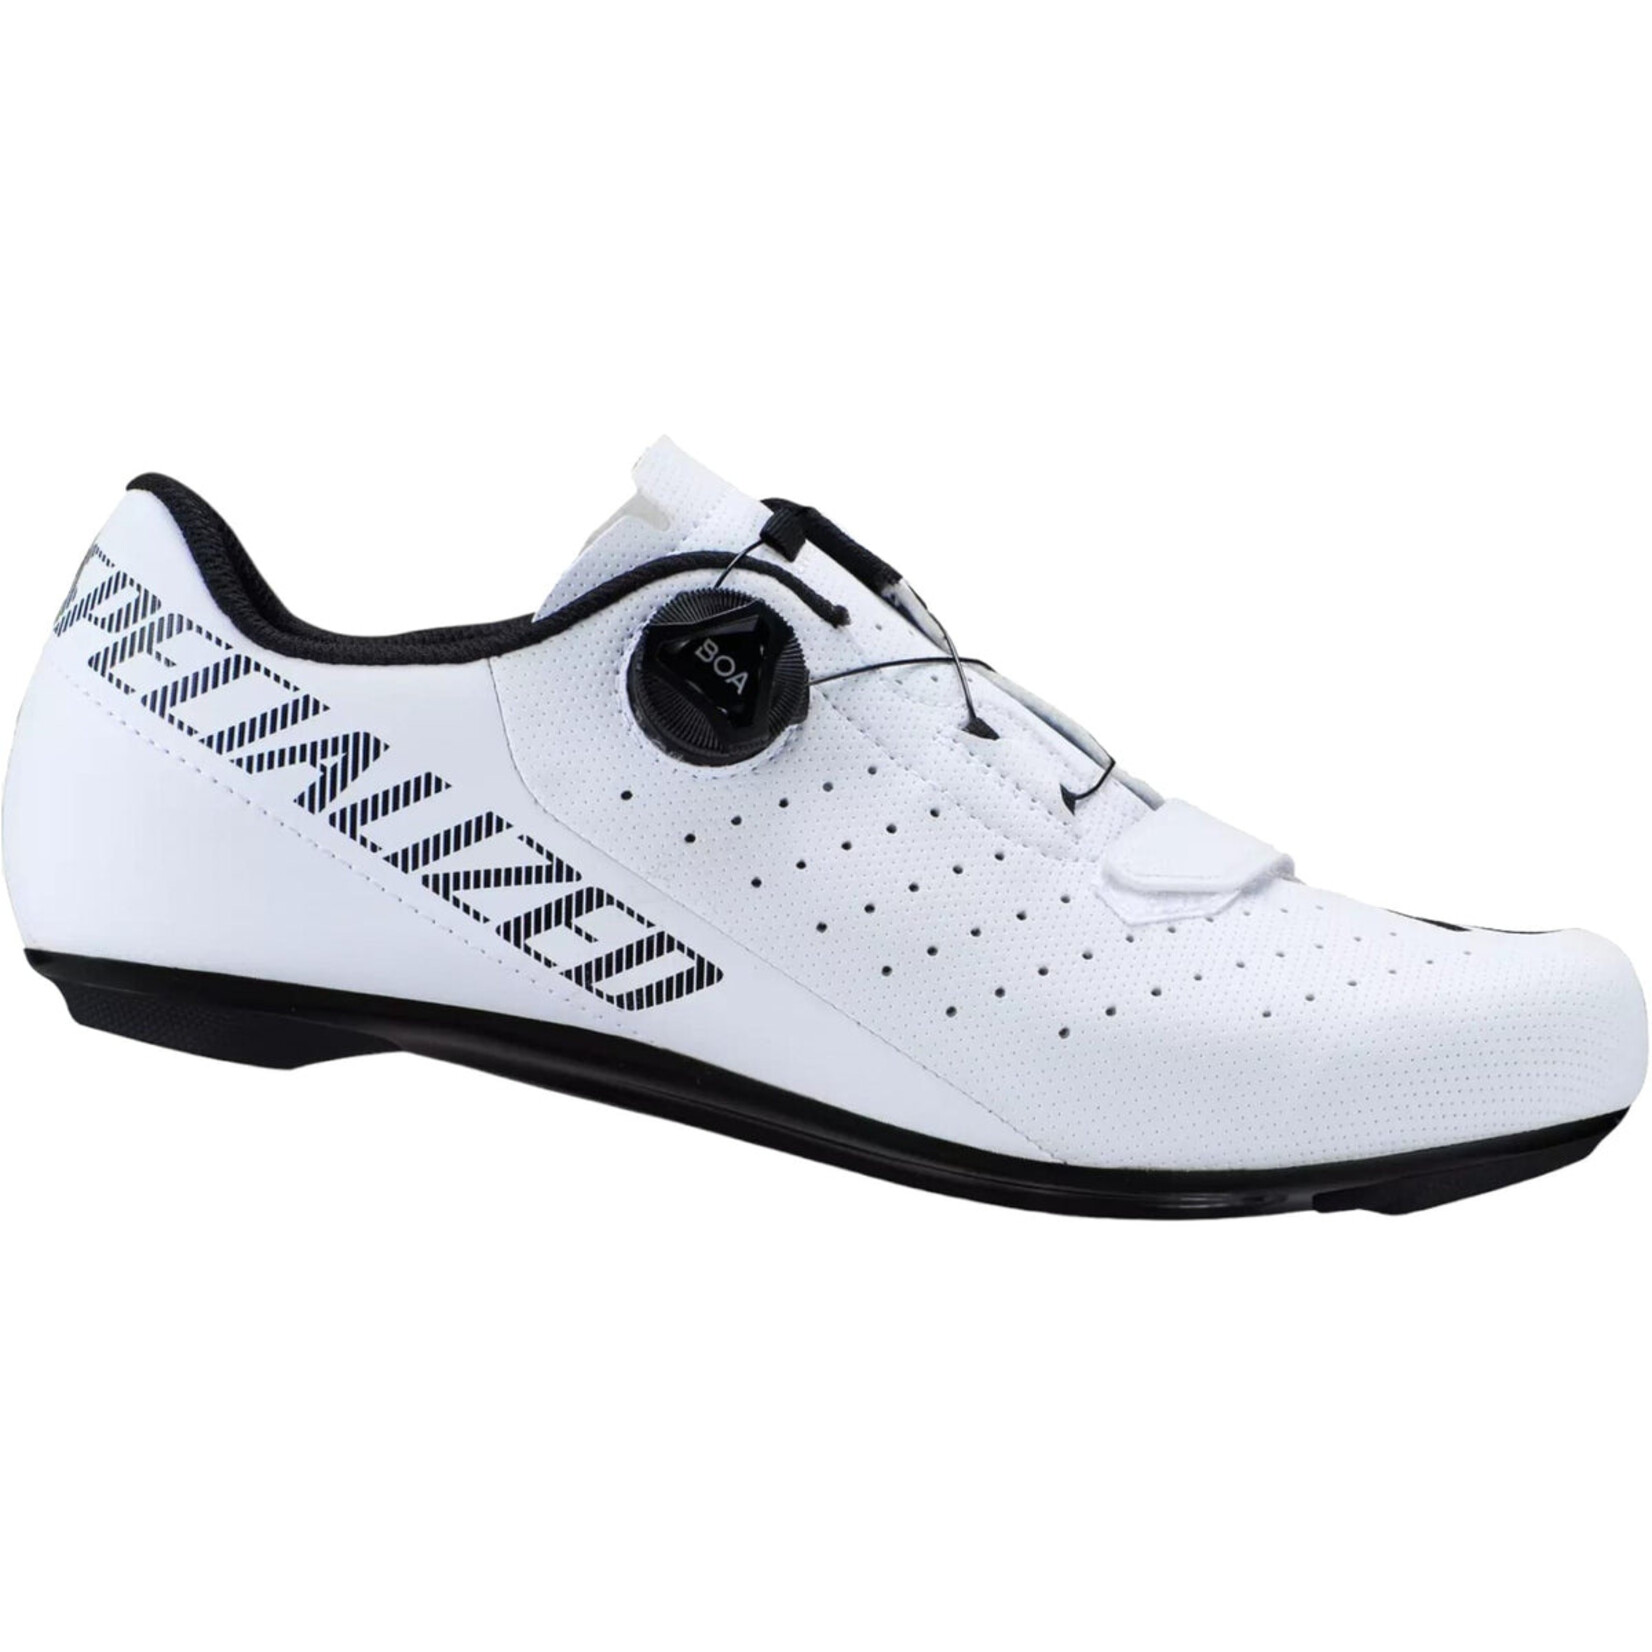 Specialized Chaussures de route Torch 1.0